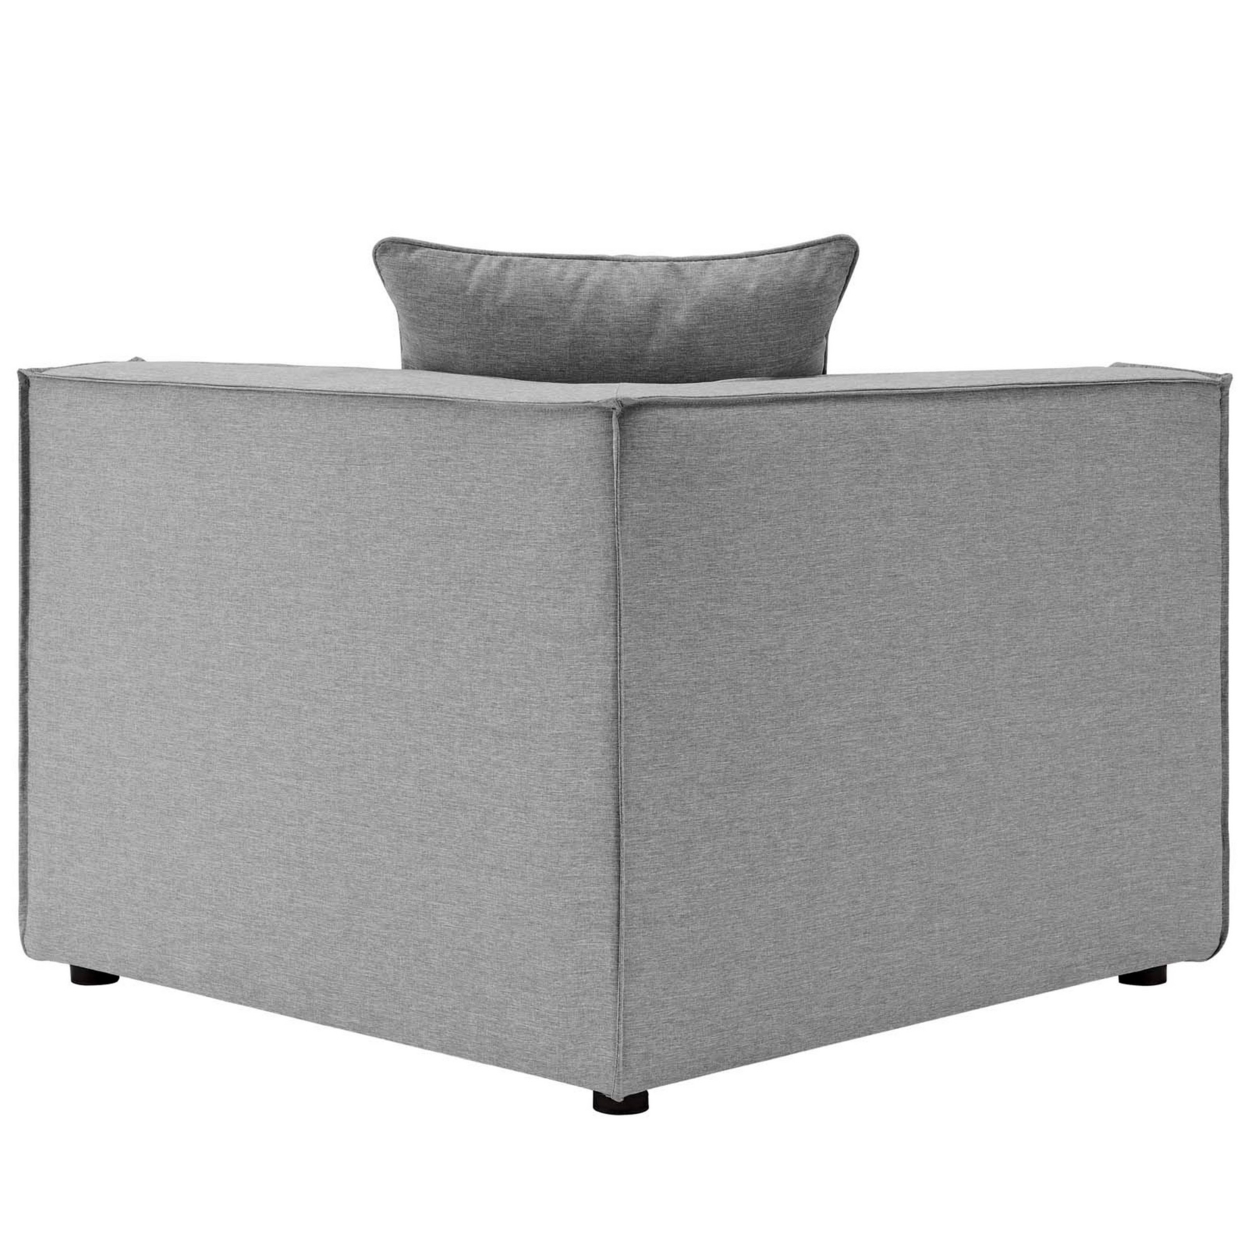 Saybrook Outdoor Patio Upholstered Sectional Sofa Corner Chair, Gray